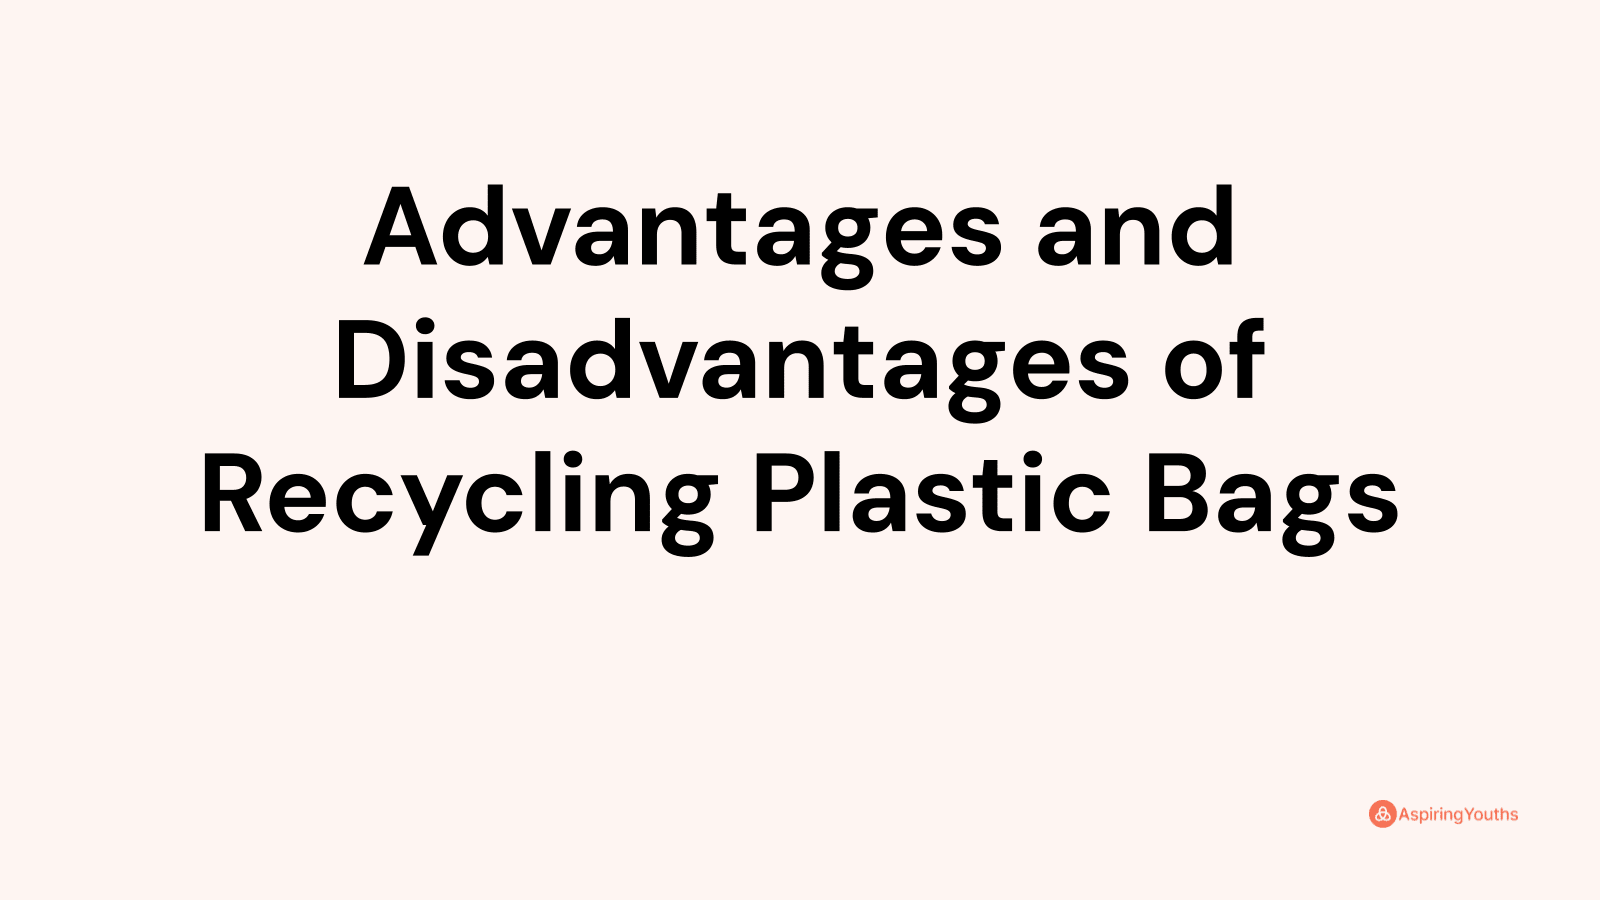 Advantages and disadvantages of Recycling Plastic Bags